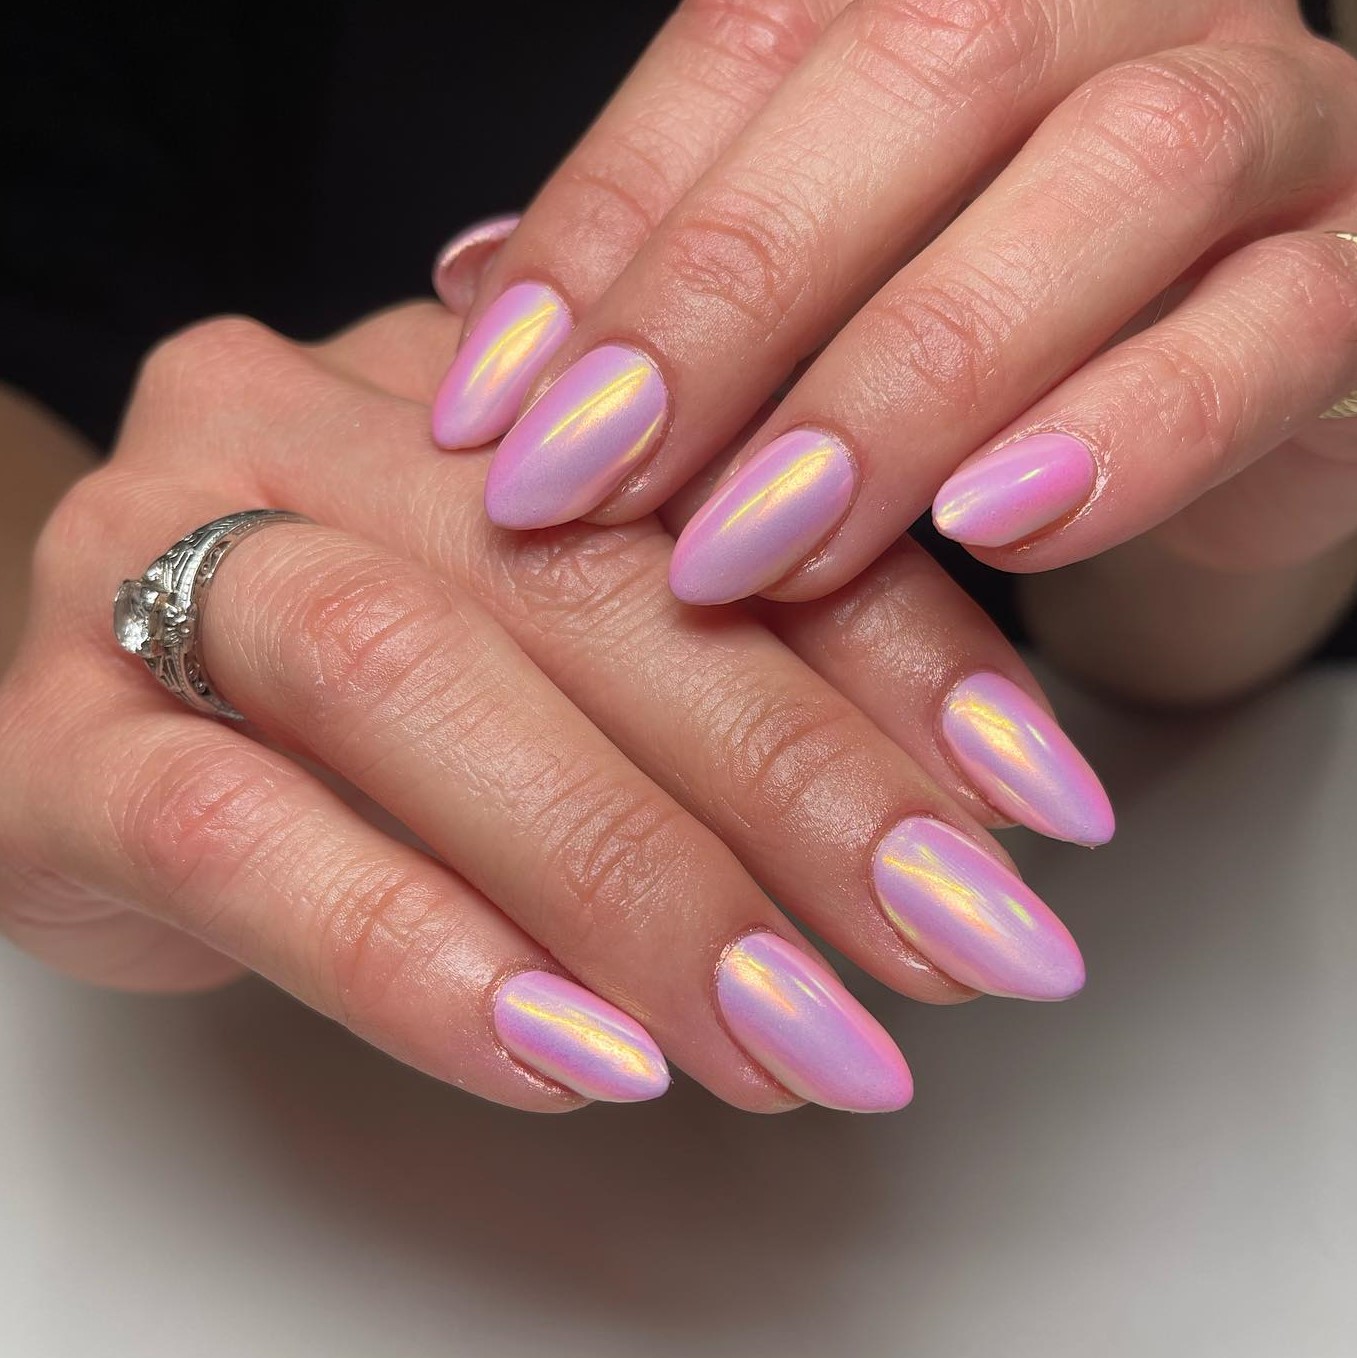 Pink Chrome Nails Pink Press on Pink Hailey Bieber Nails - Etsy